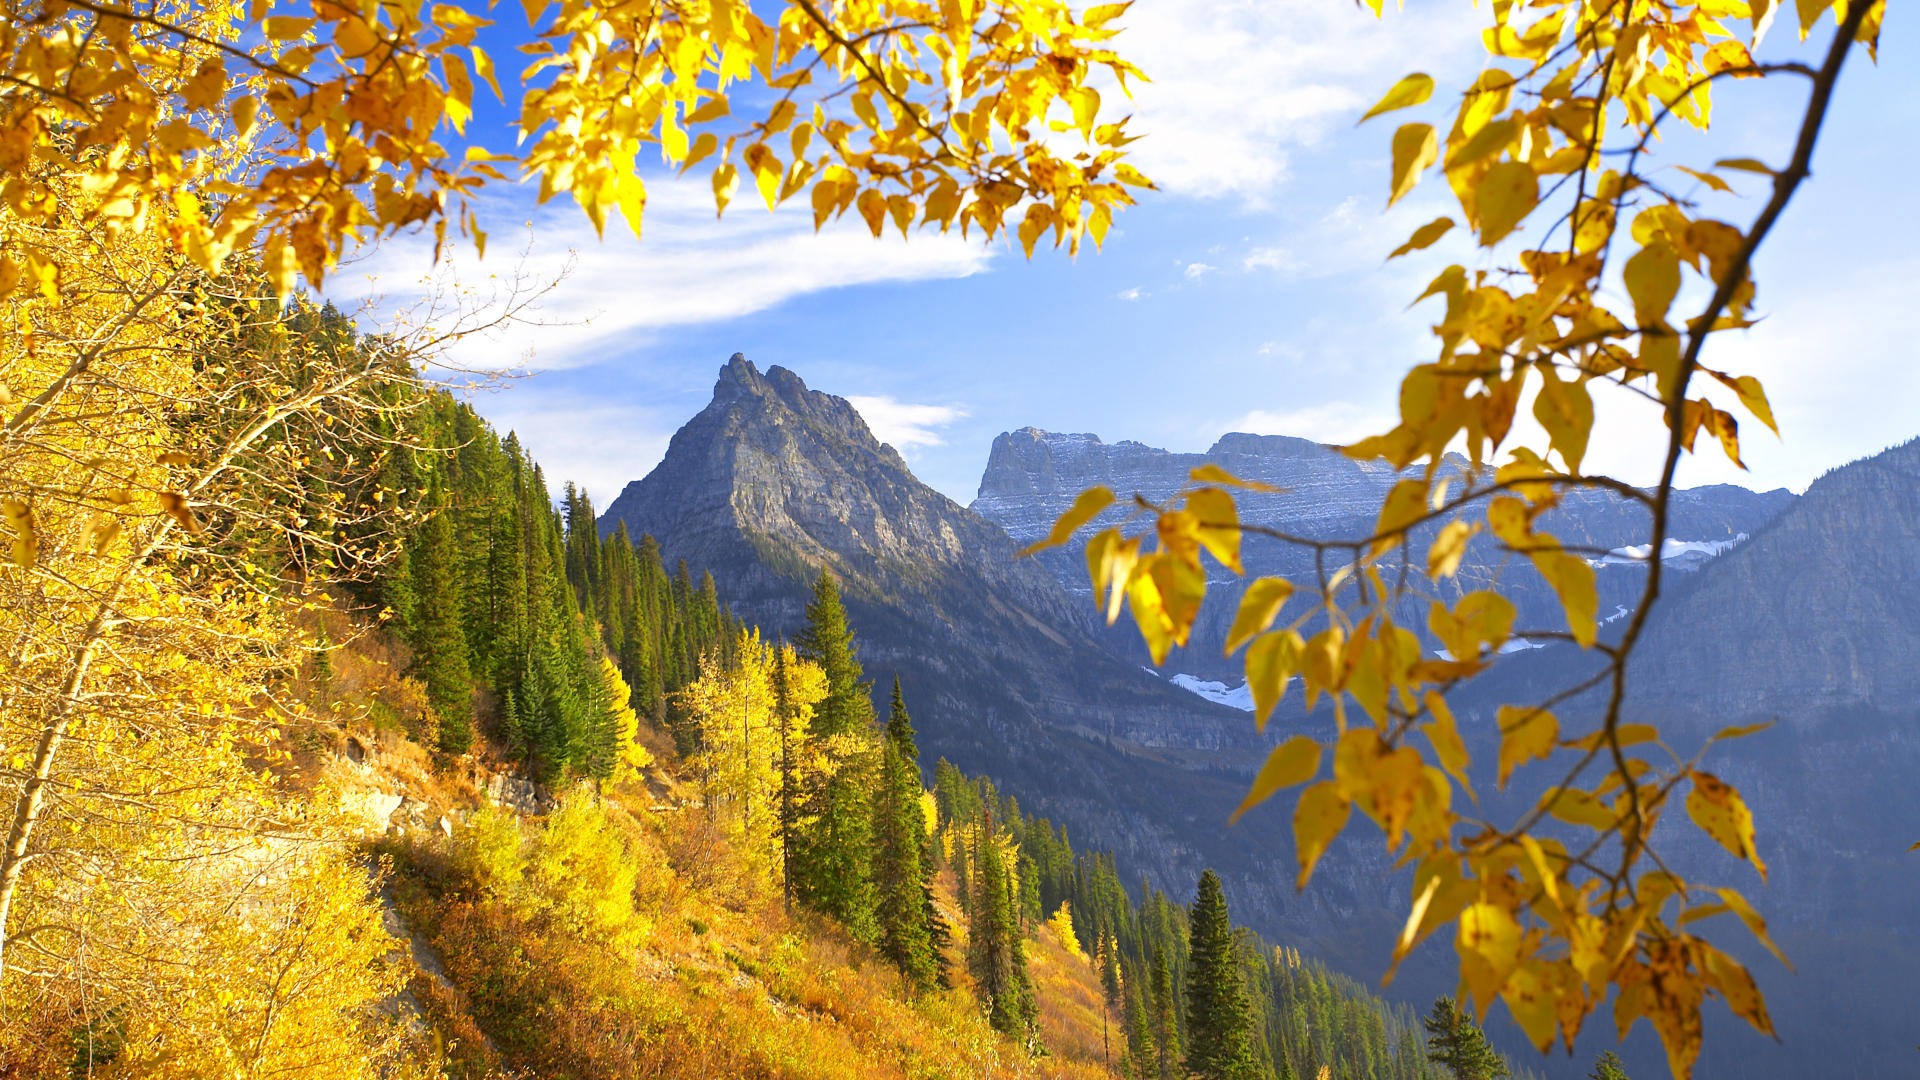 Autumn Wallpaper HD let you feel the magic of Fall